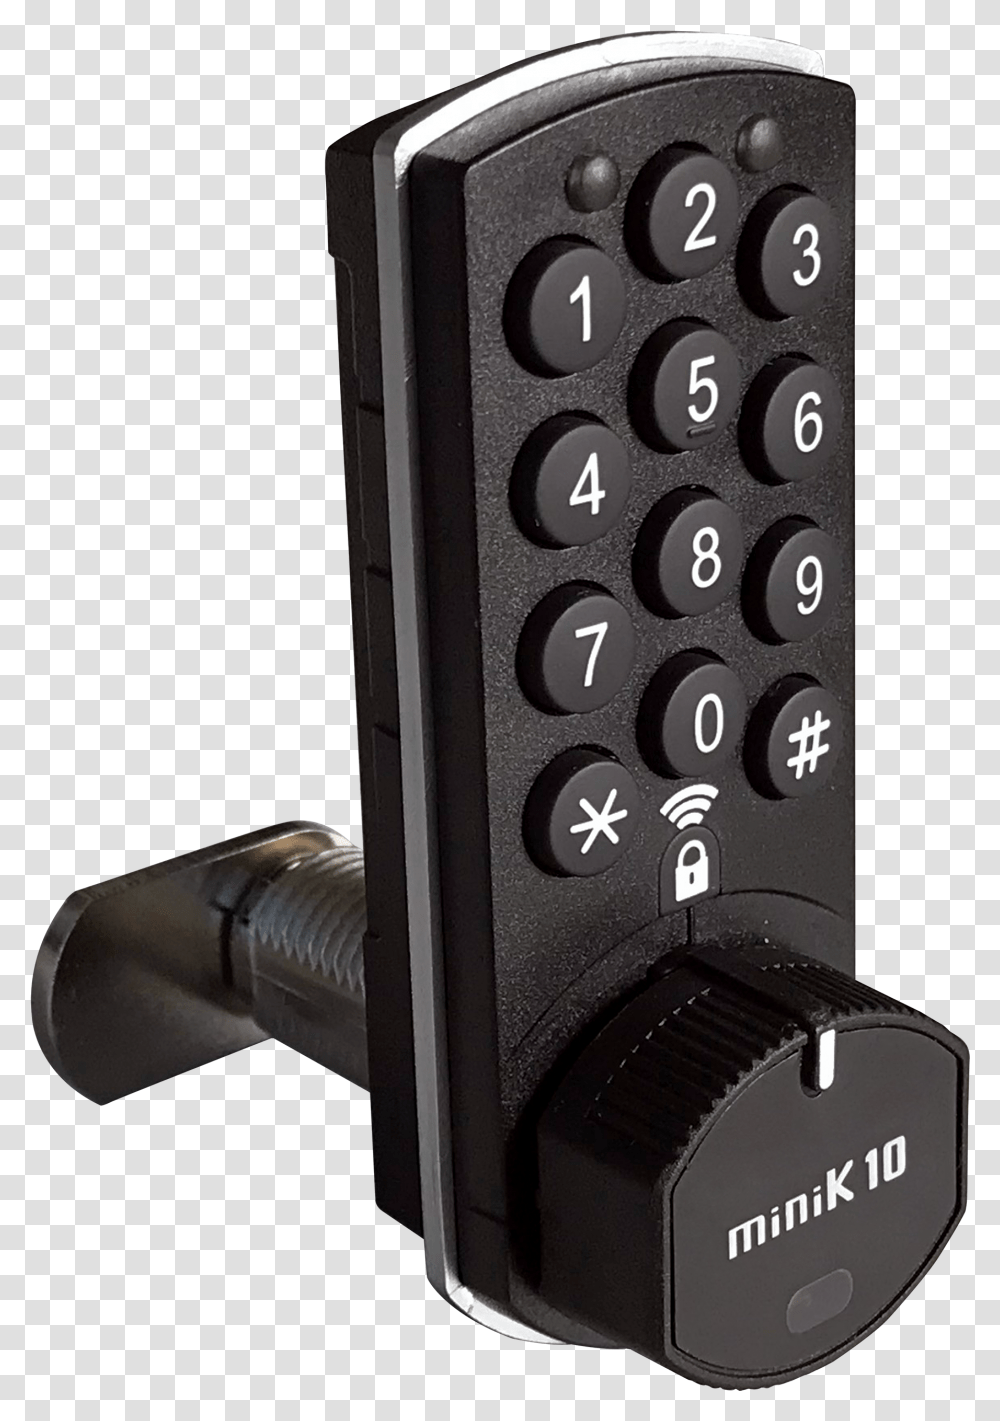 Digital Cam Lock Ksq Payphone, Electronics, Wristwatch, Dial Telephone, Electrical Device Transparent Png